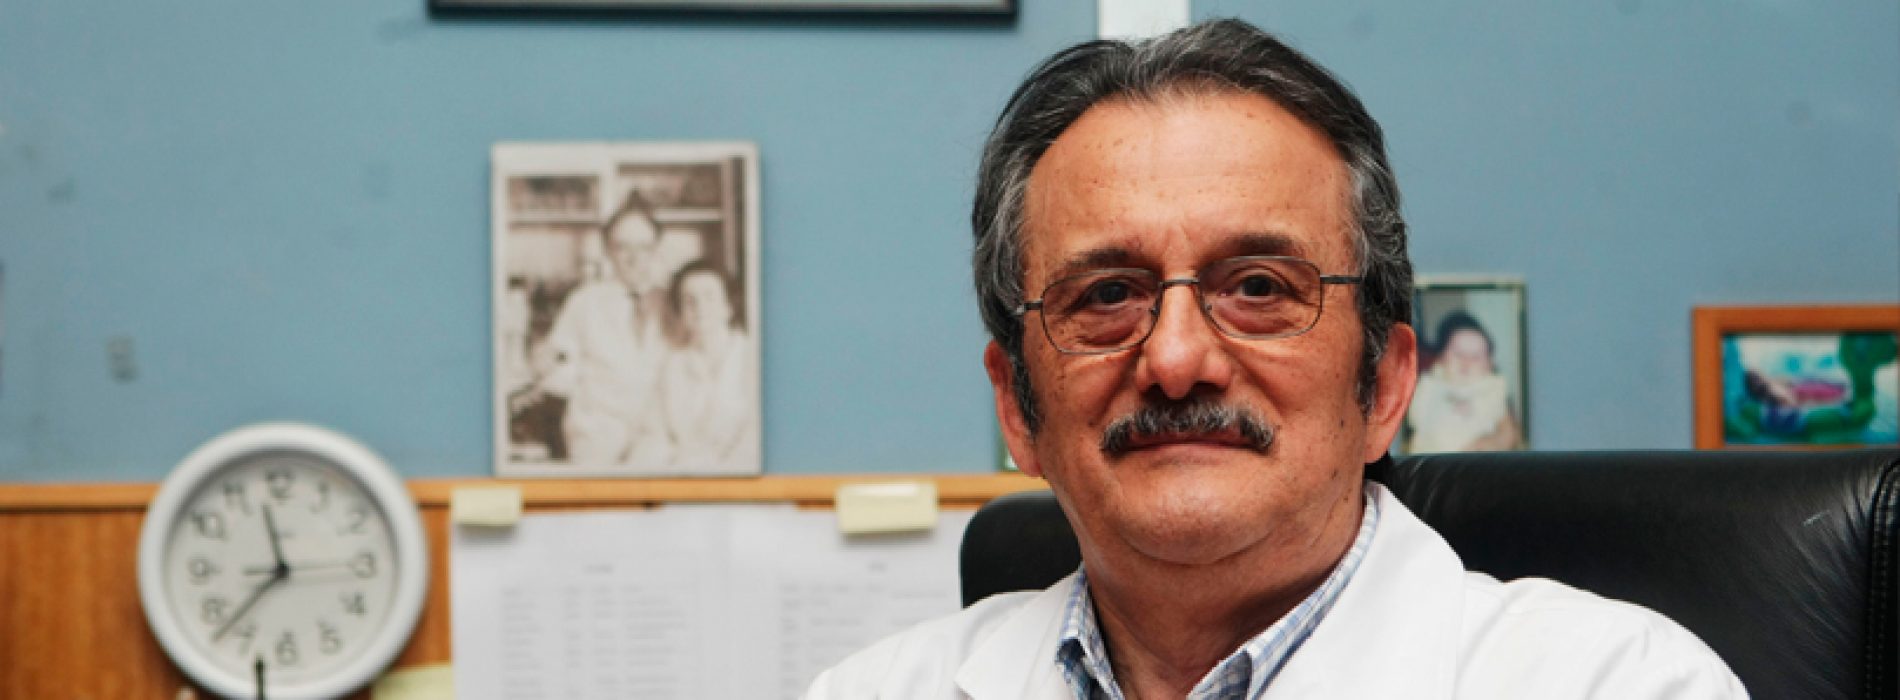 Department of Biochemistry and Molecular Biology carries out seminar by Prof. Arturo Ferreira